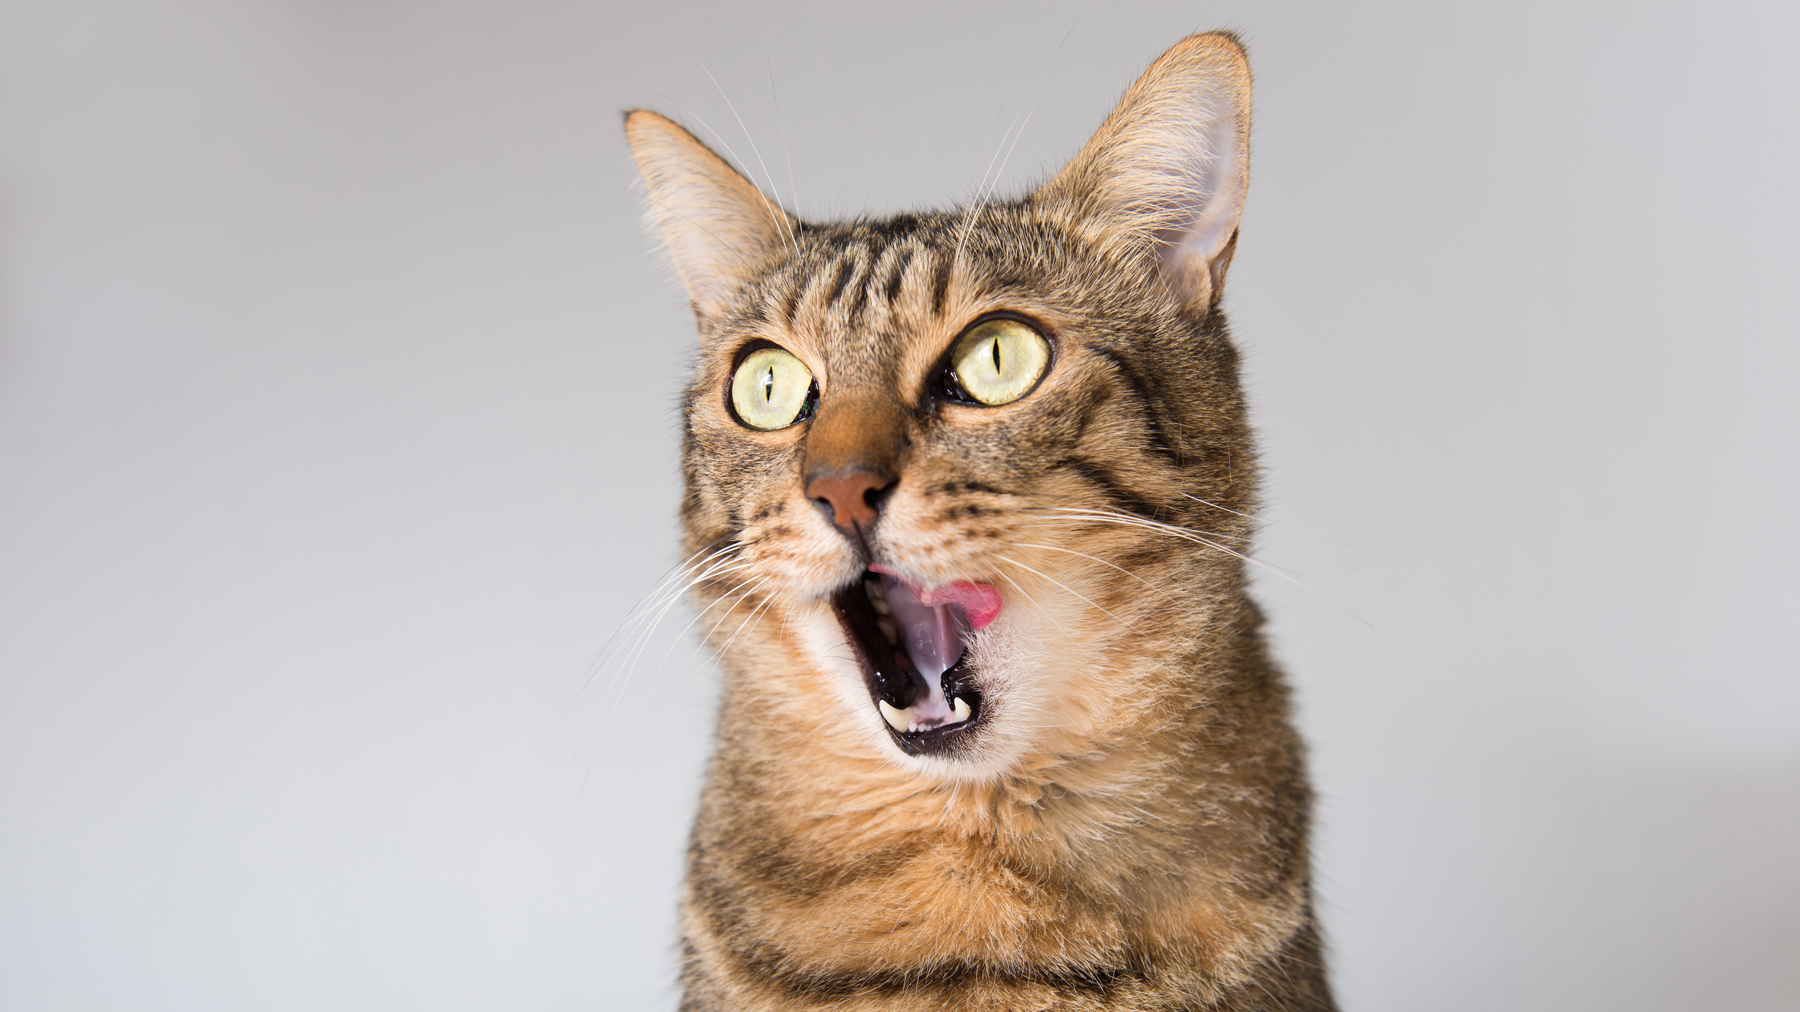 Food aggression in cats: A vet's guide to signs and treatment | PetsRadar